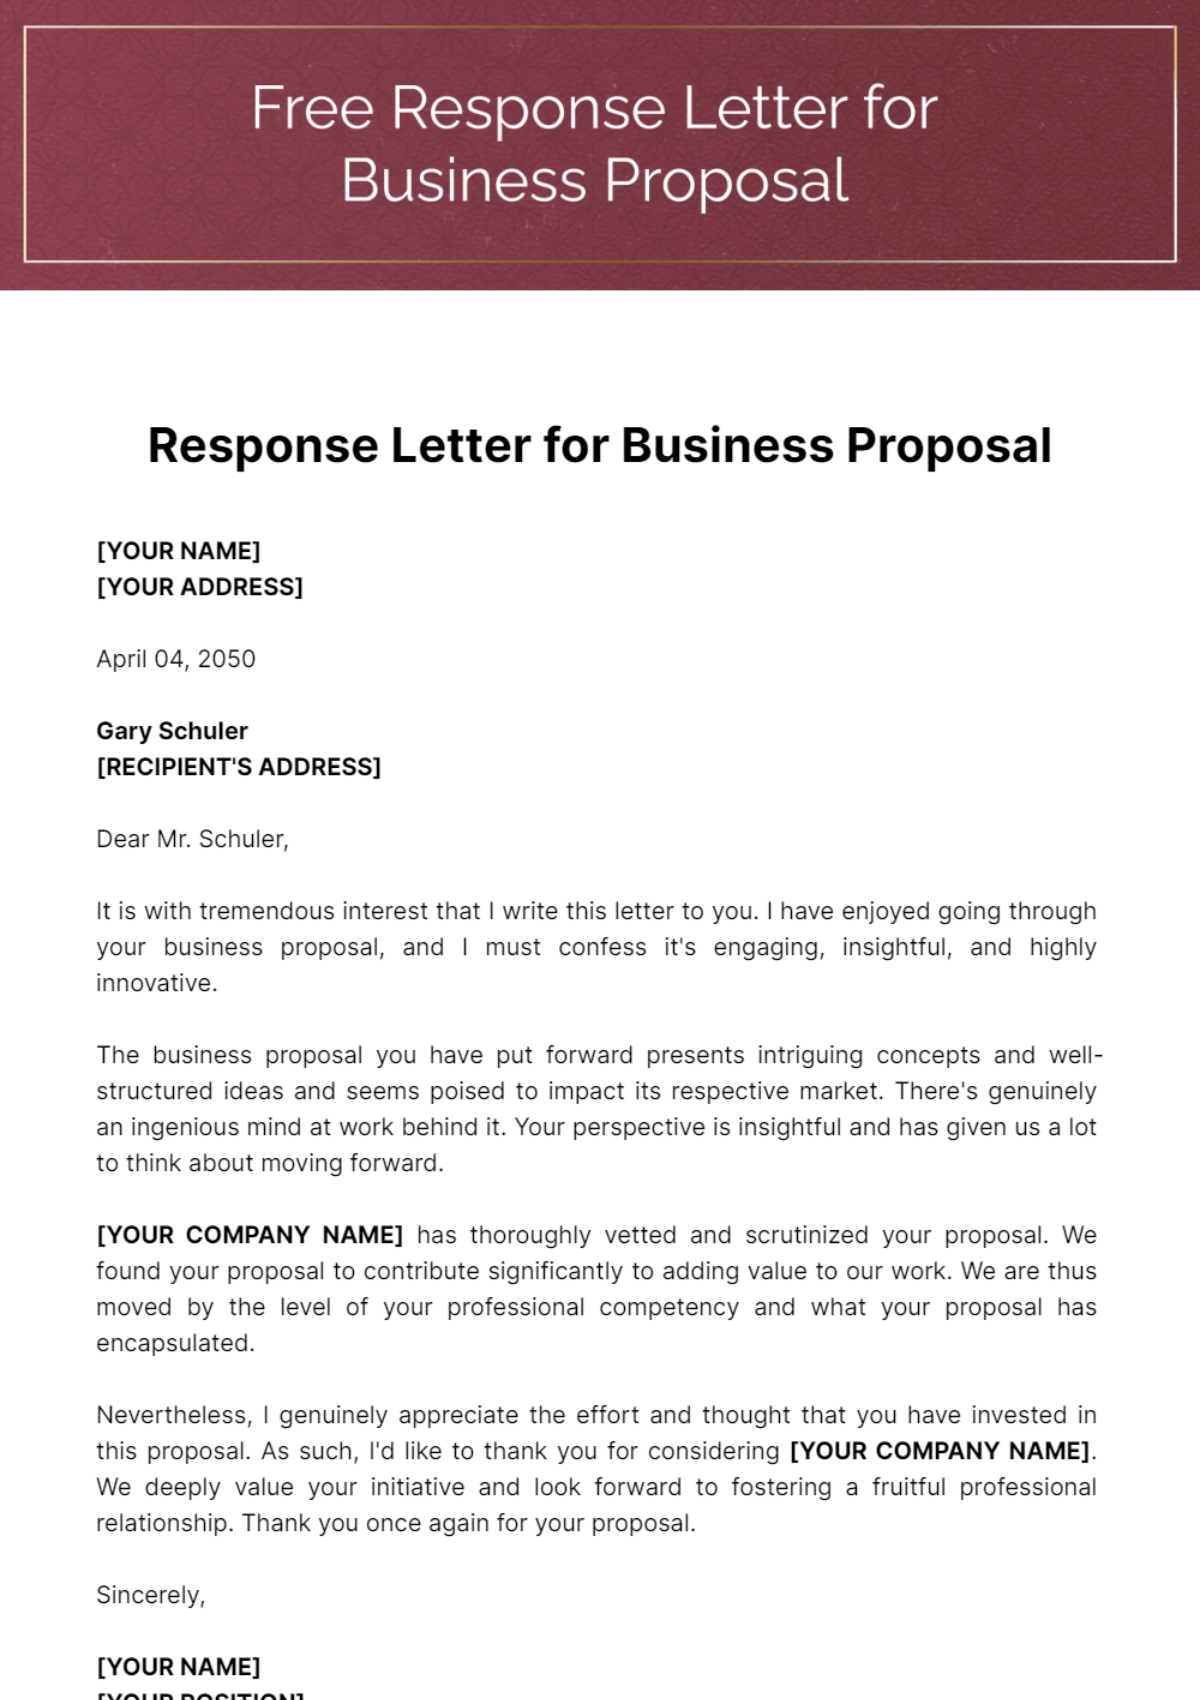 Response Letter for Business Proposal Template